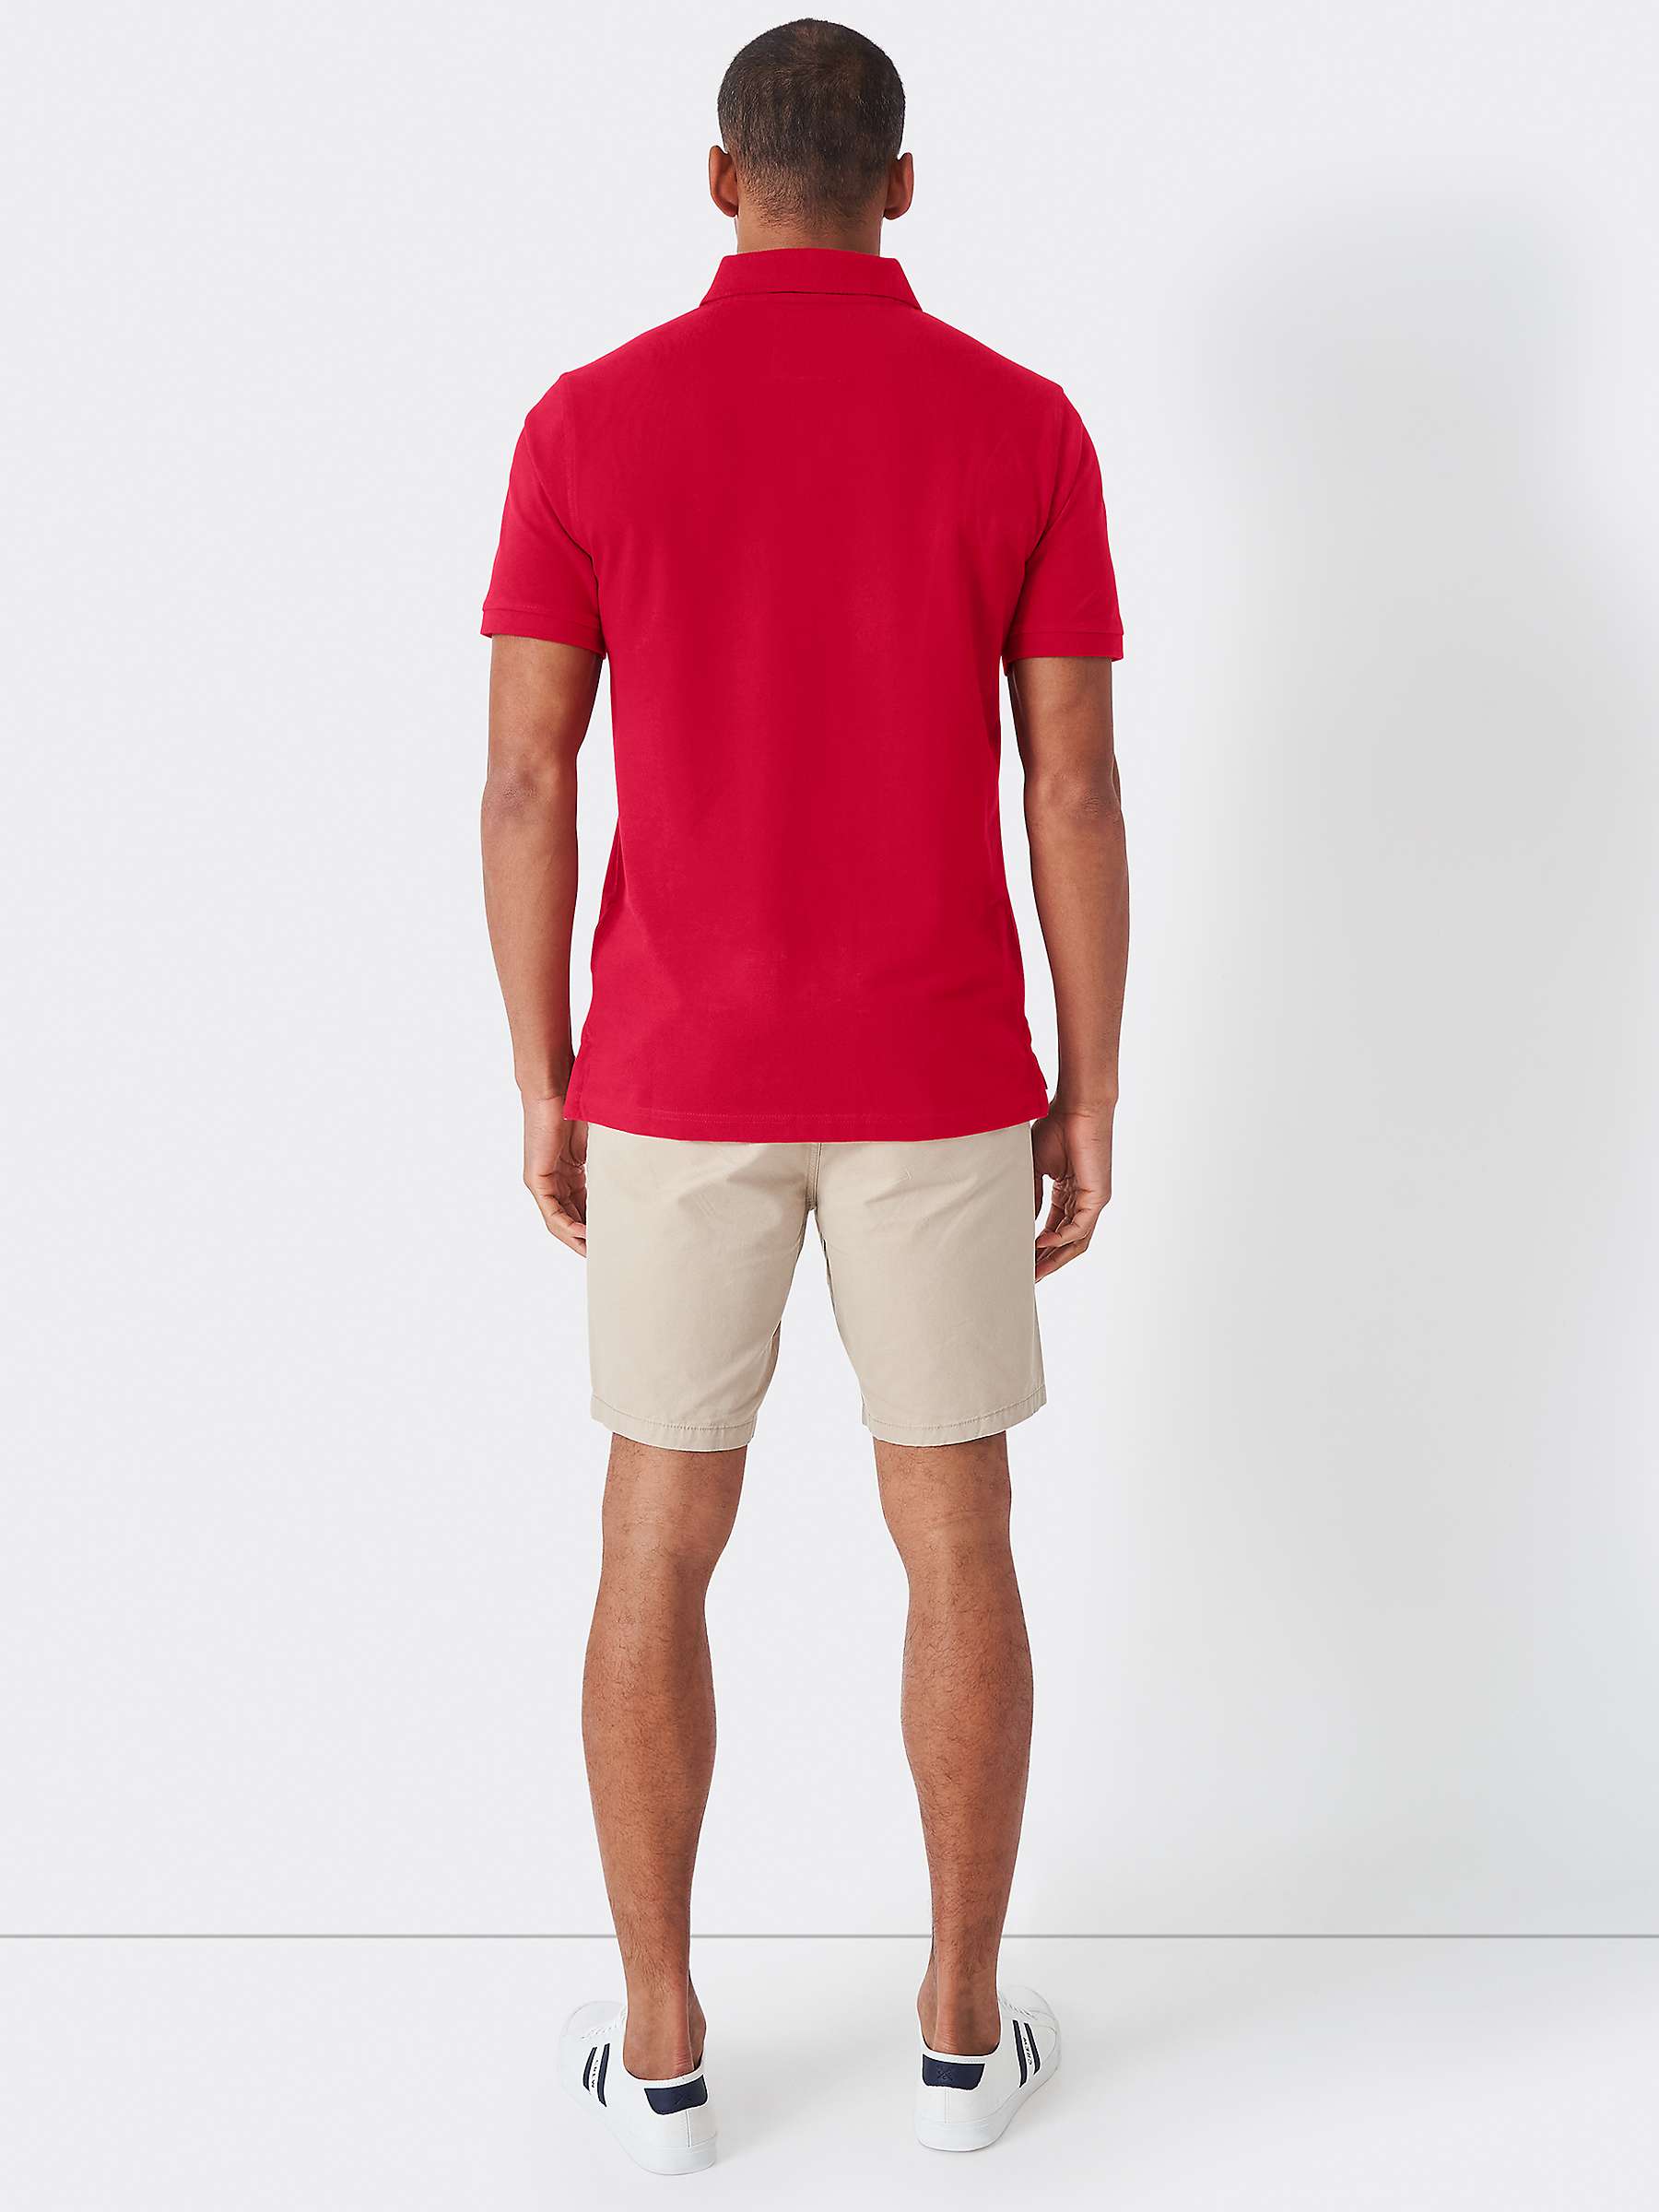 Buy Crew Clothing Pique Short Sleeve Polo Top, Crimson Red Online at johnlewis.com